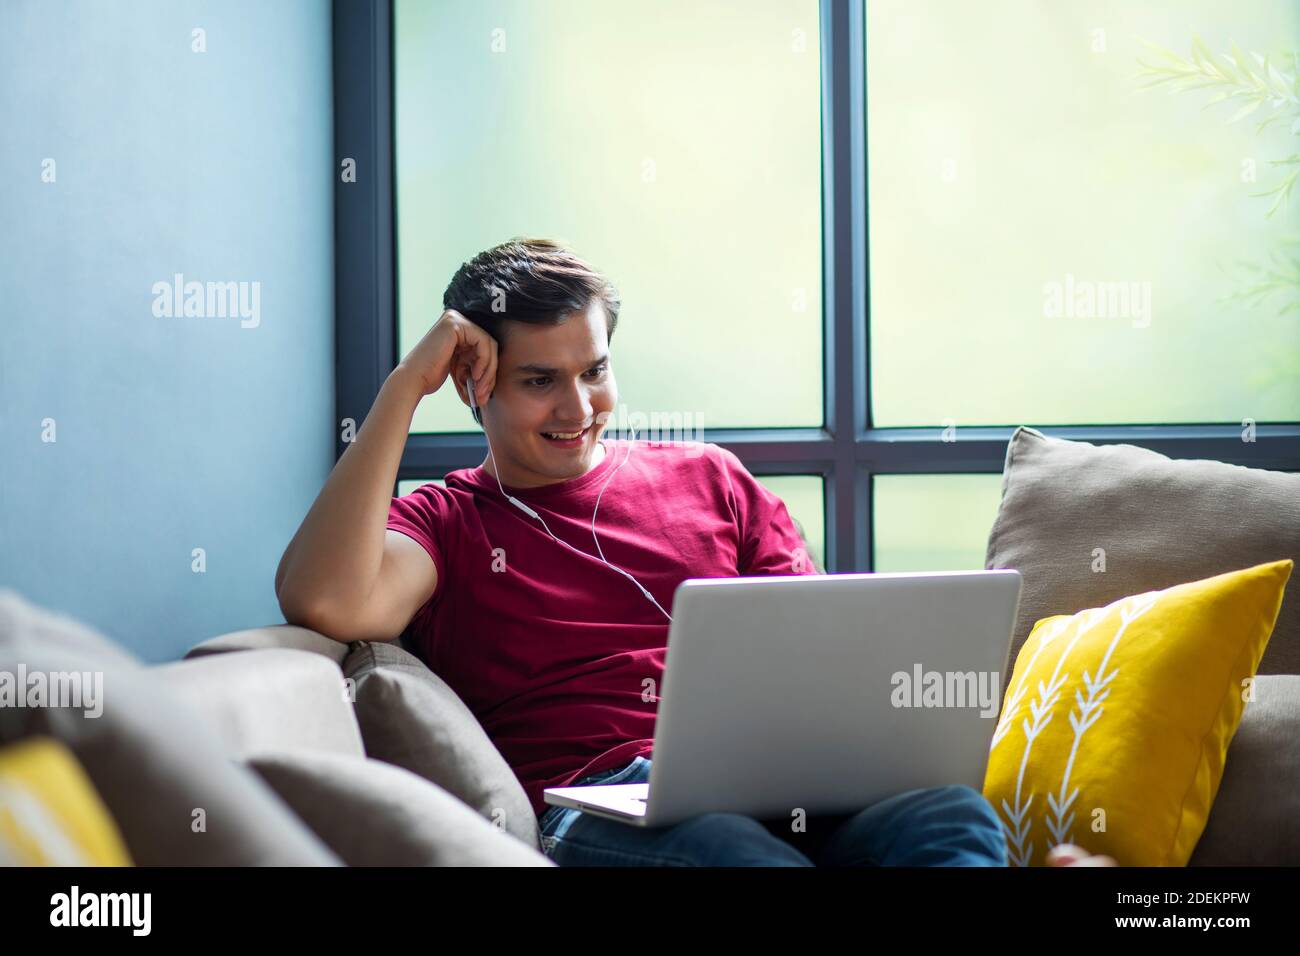 YOUNG MAN WATCHING A MOVIE ON HIS LAPTOP WHILE SITTING ON HIS COUCH COMFORTABLY Stock Photo